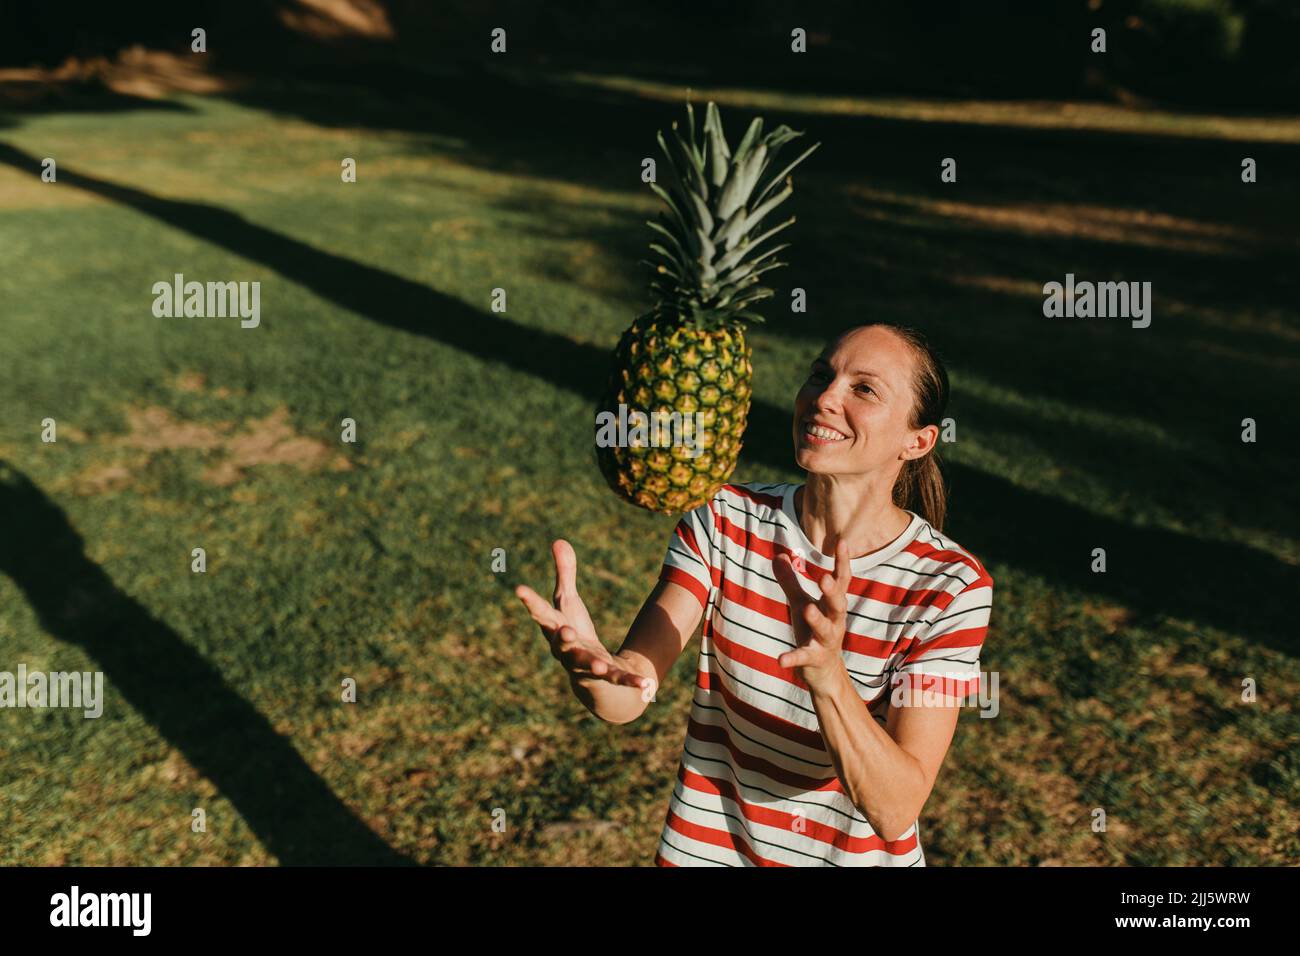 Happy woman playing with pineapple in park on sunny day Stock Photo